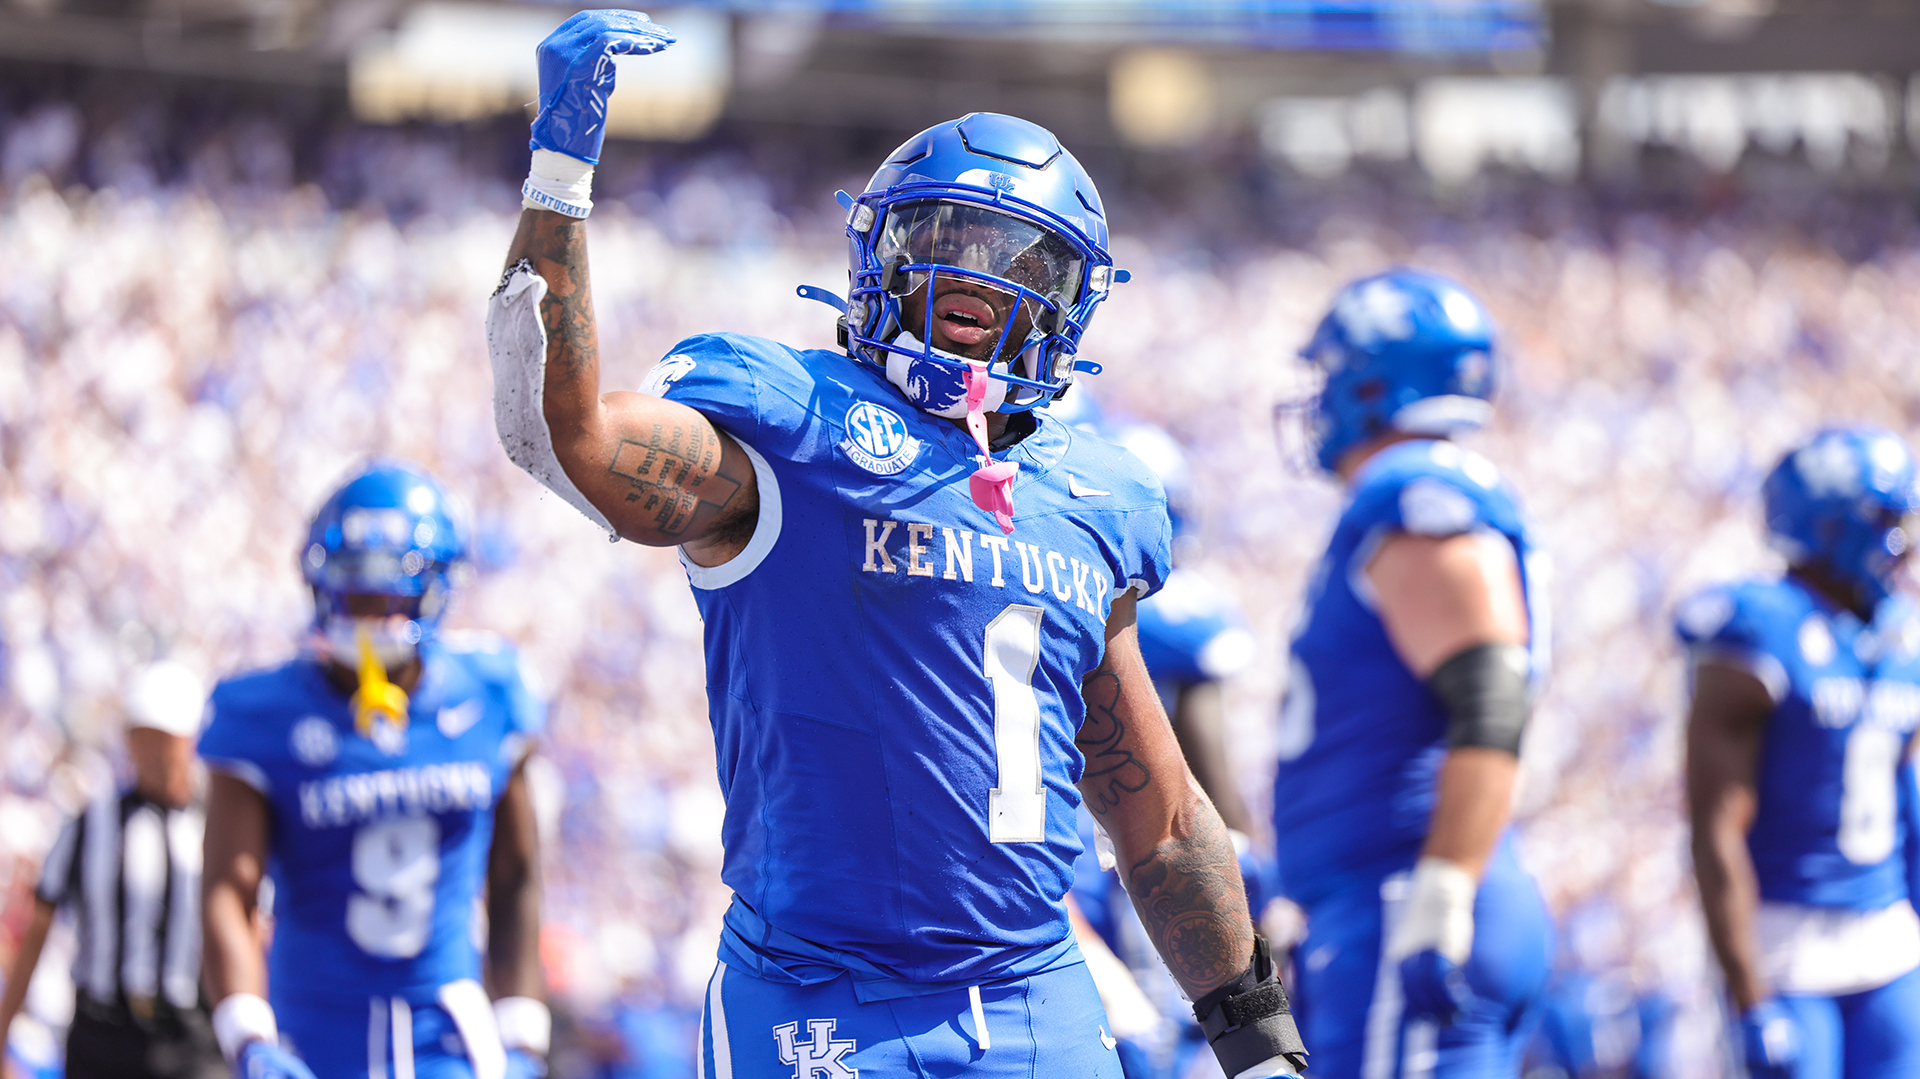 Ray's Day: Davis Has Huge Game in Cats' Win Over Gators